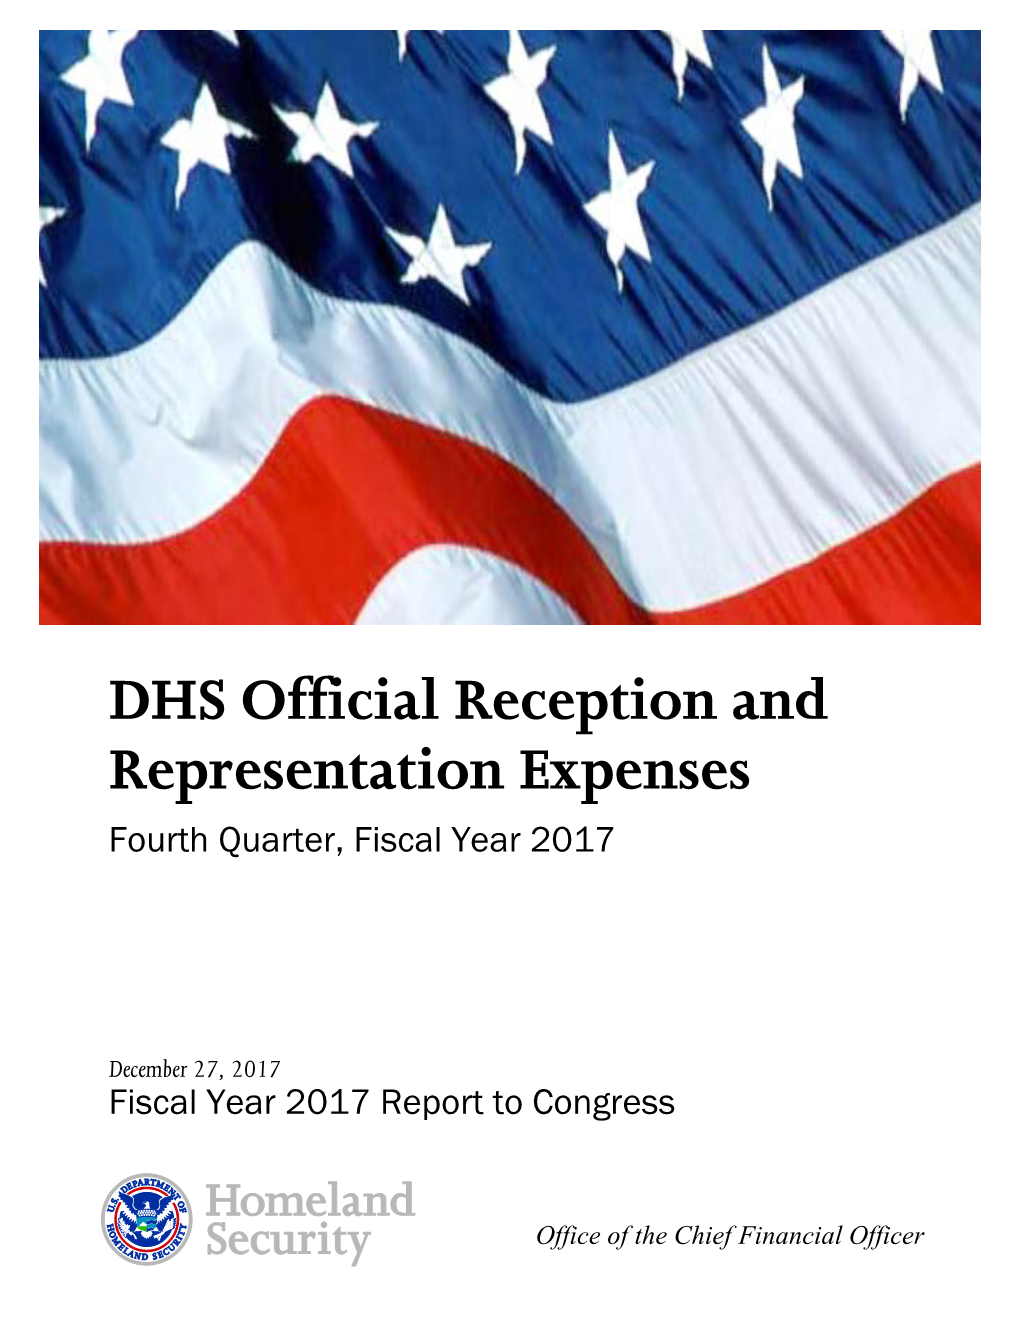 DHS Official Reception and Representation Expenses, Fourth